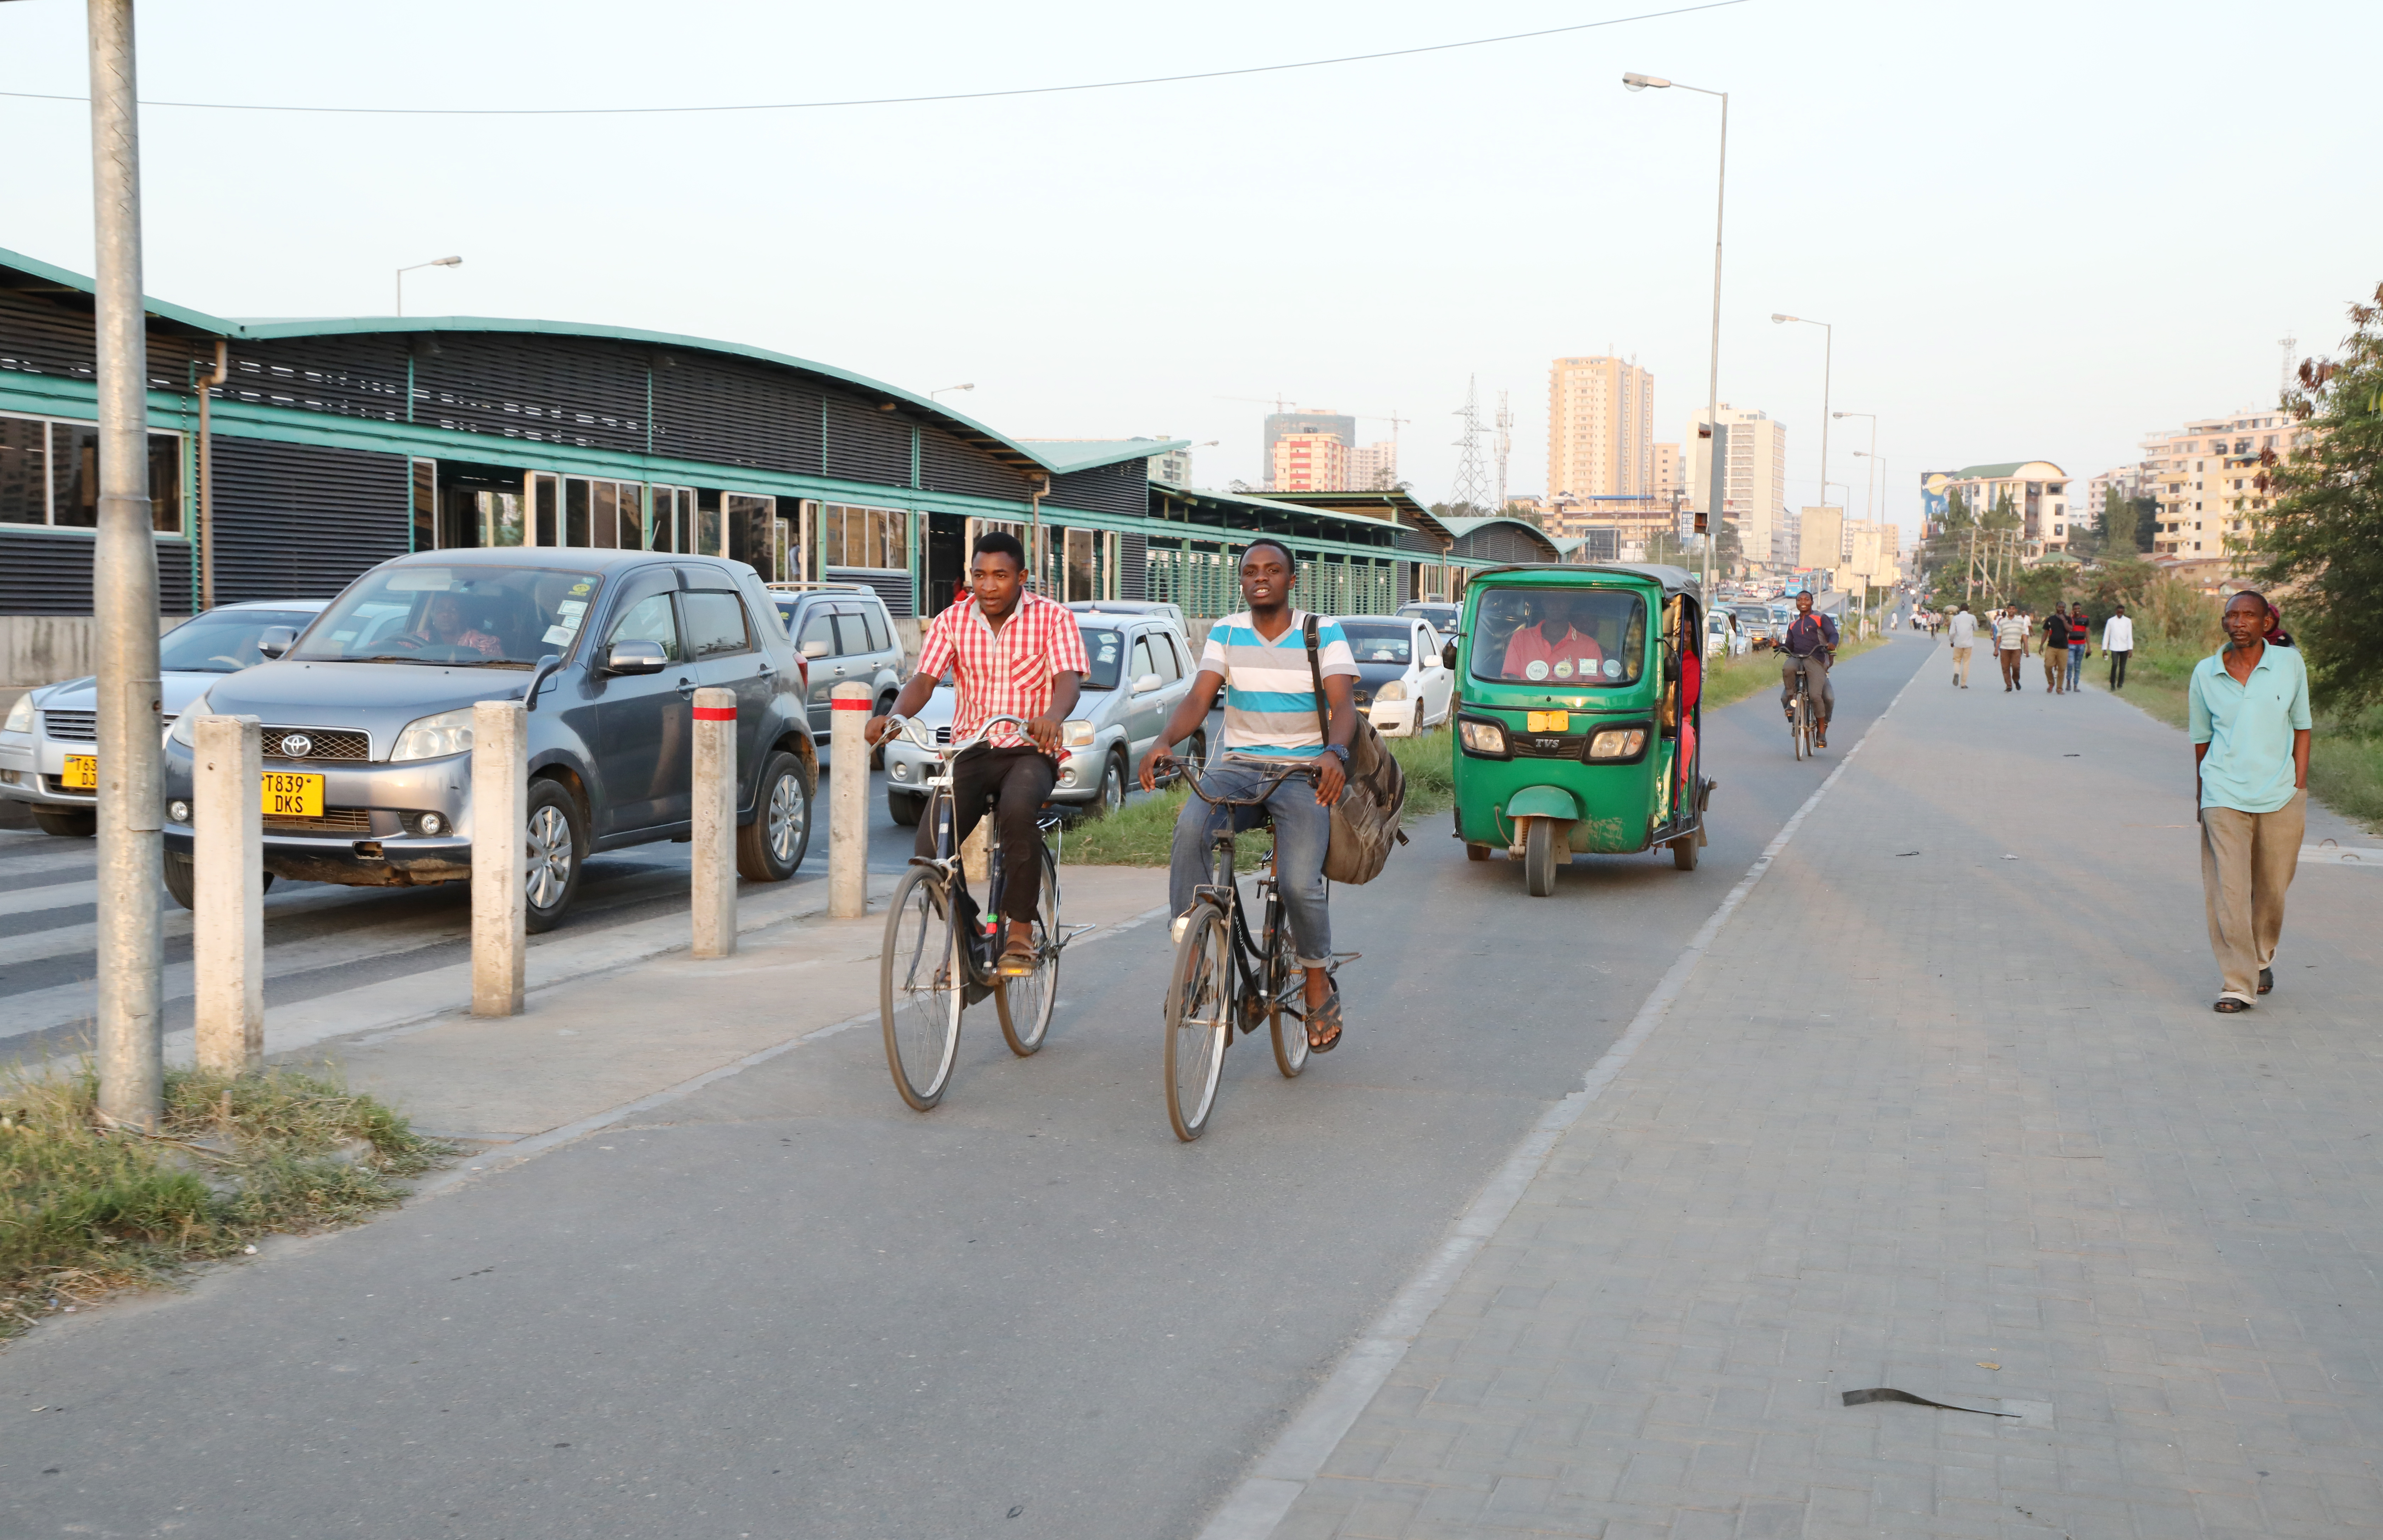 Street overview of the Jangwani terminal with a pedestrian walk way as well as a cycling lane, an example of an all-inclusive mobility street in Dar es Salaam, Tanzania.